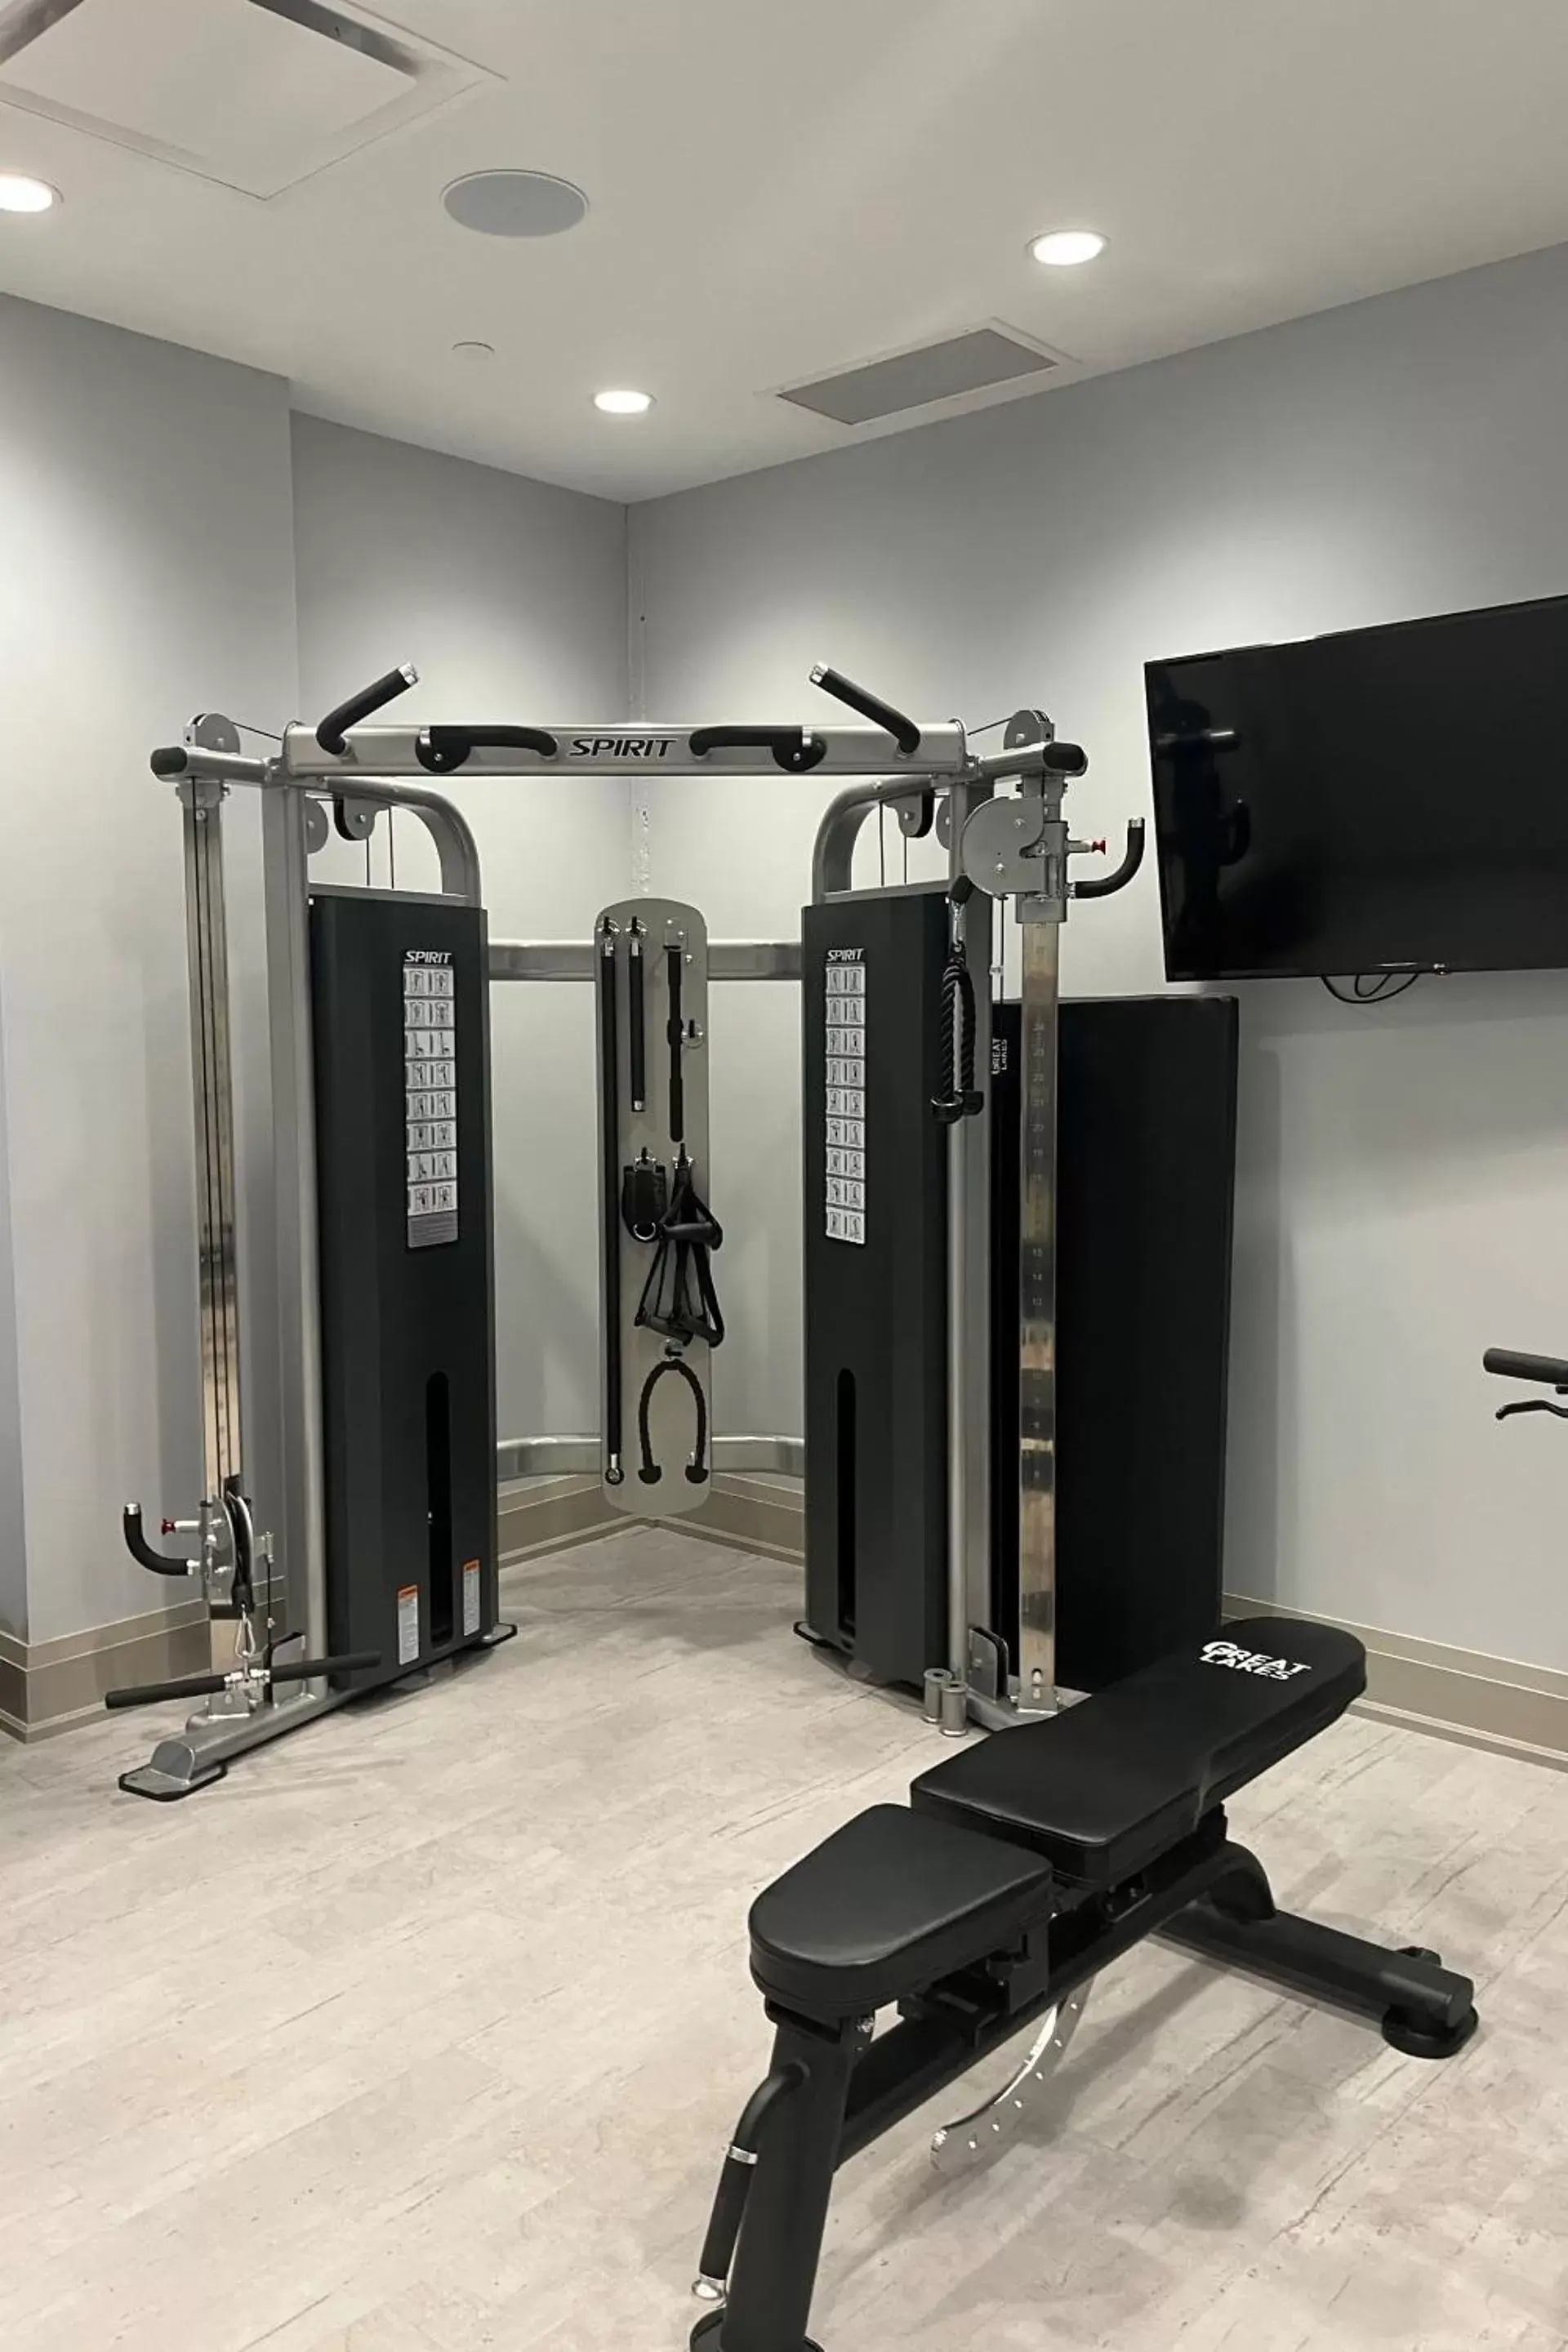 Area and facilities, Fitness Center/Facilities in 124 on Queen Hotel & Spa